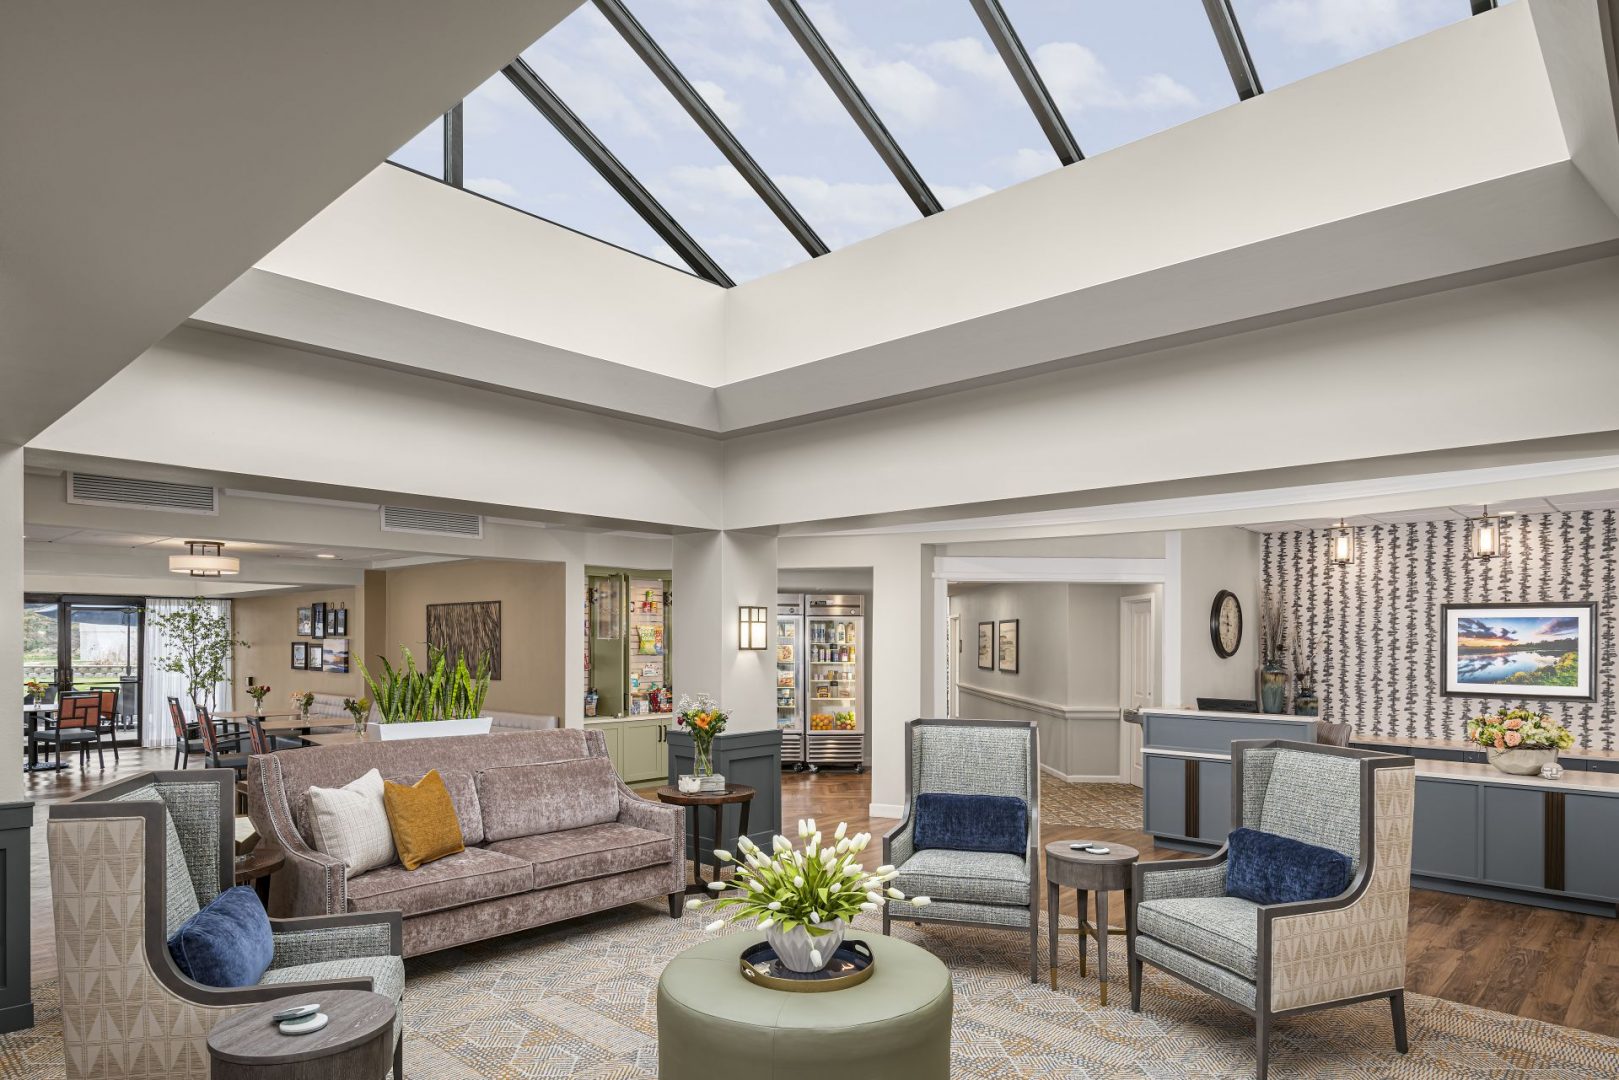 Bright and spacious lobby area with chairs, a sofa, skylight, and decorative plants.